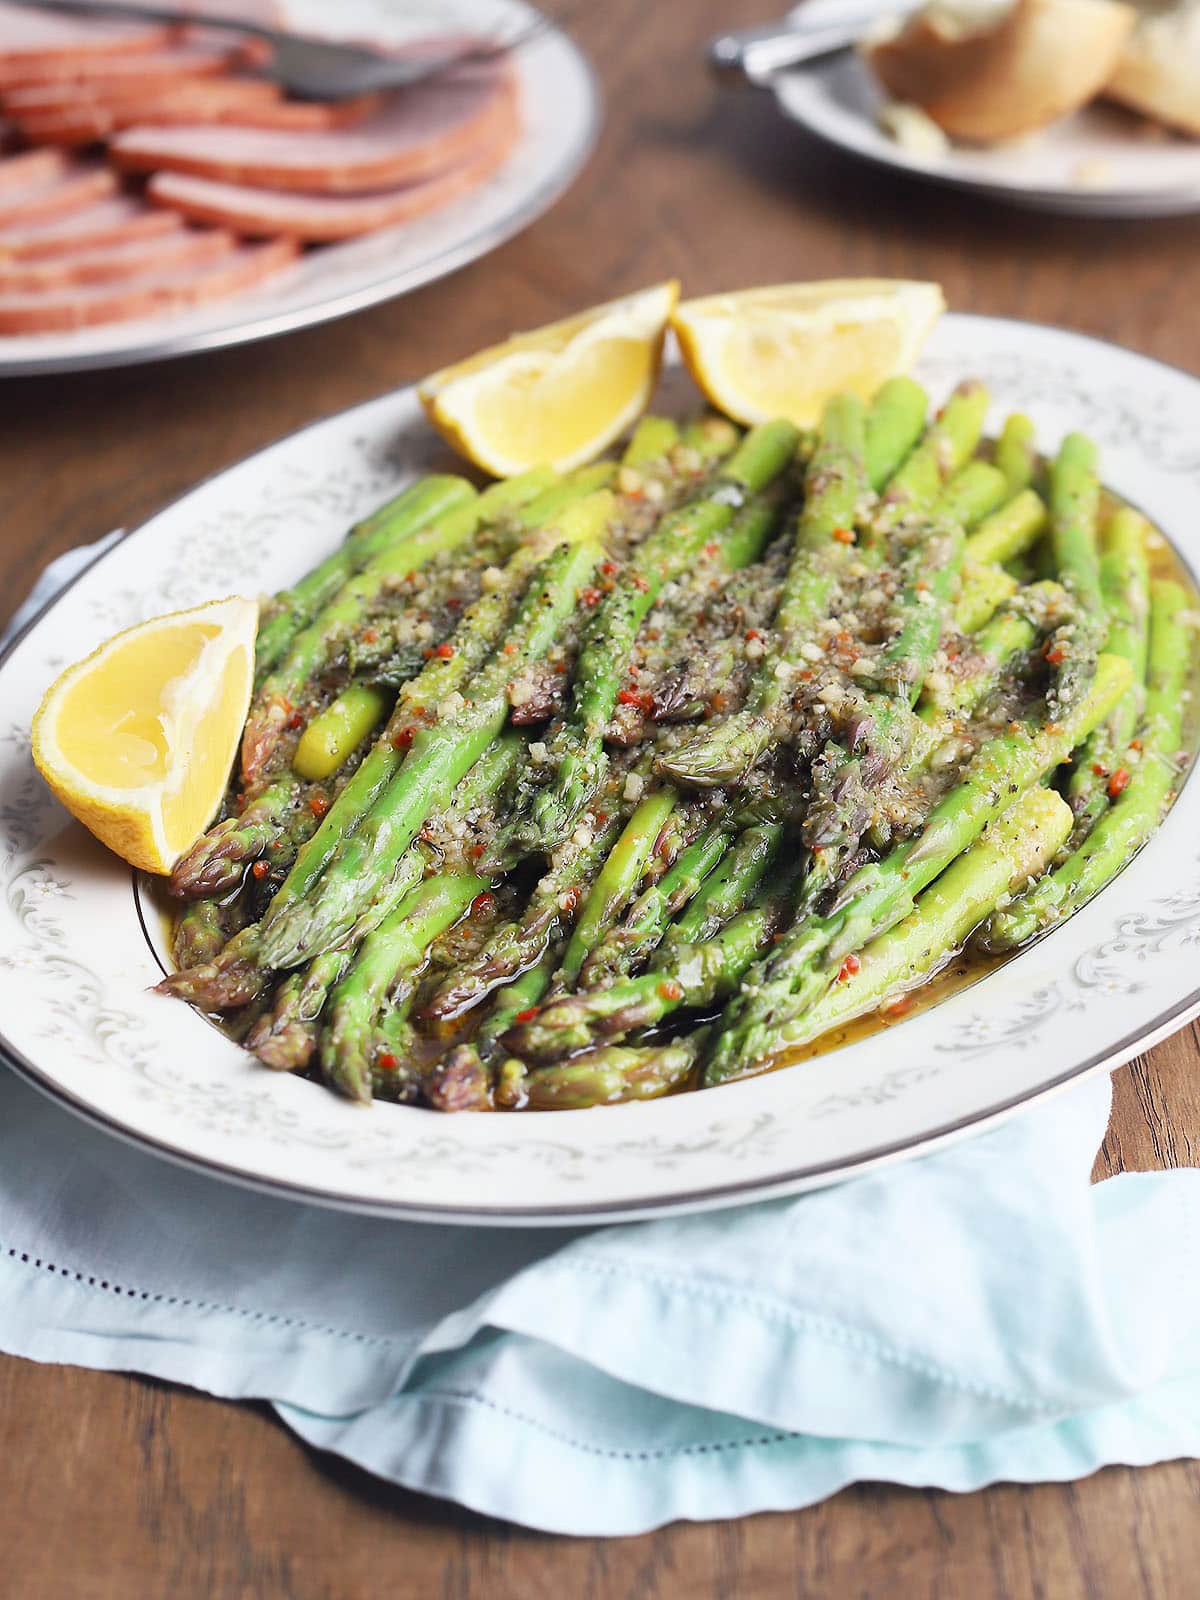 marinated asparagus in a white decorative serving dish with lemon wedges on the side